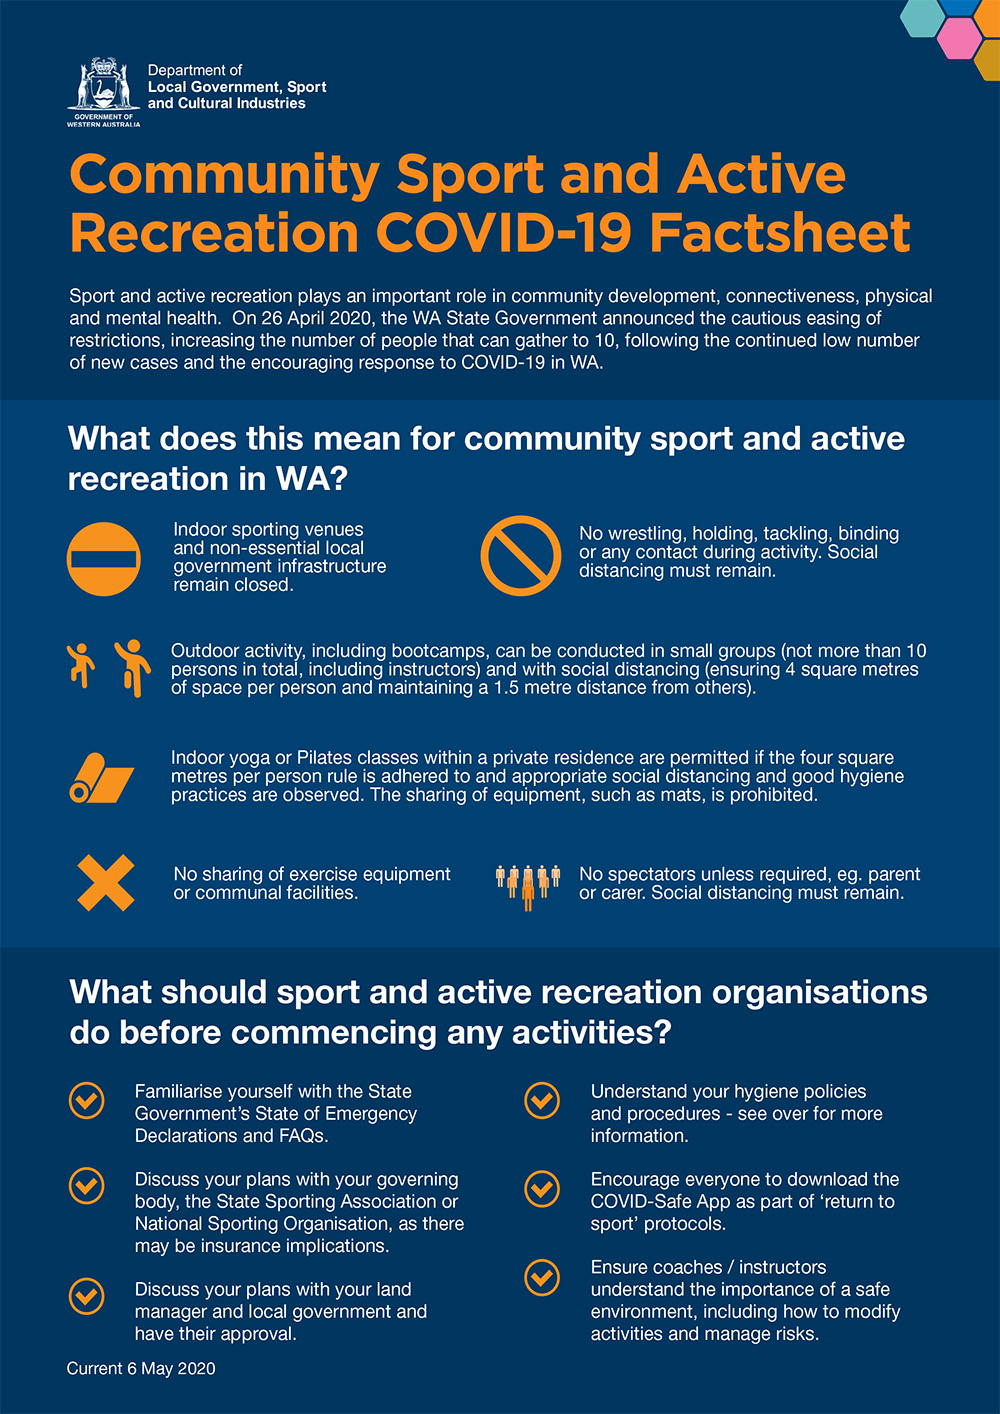 Community Sport and Active Recreation COVID-19 Factsheet. Full information below.